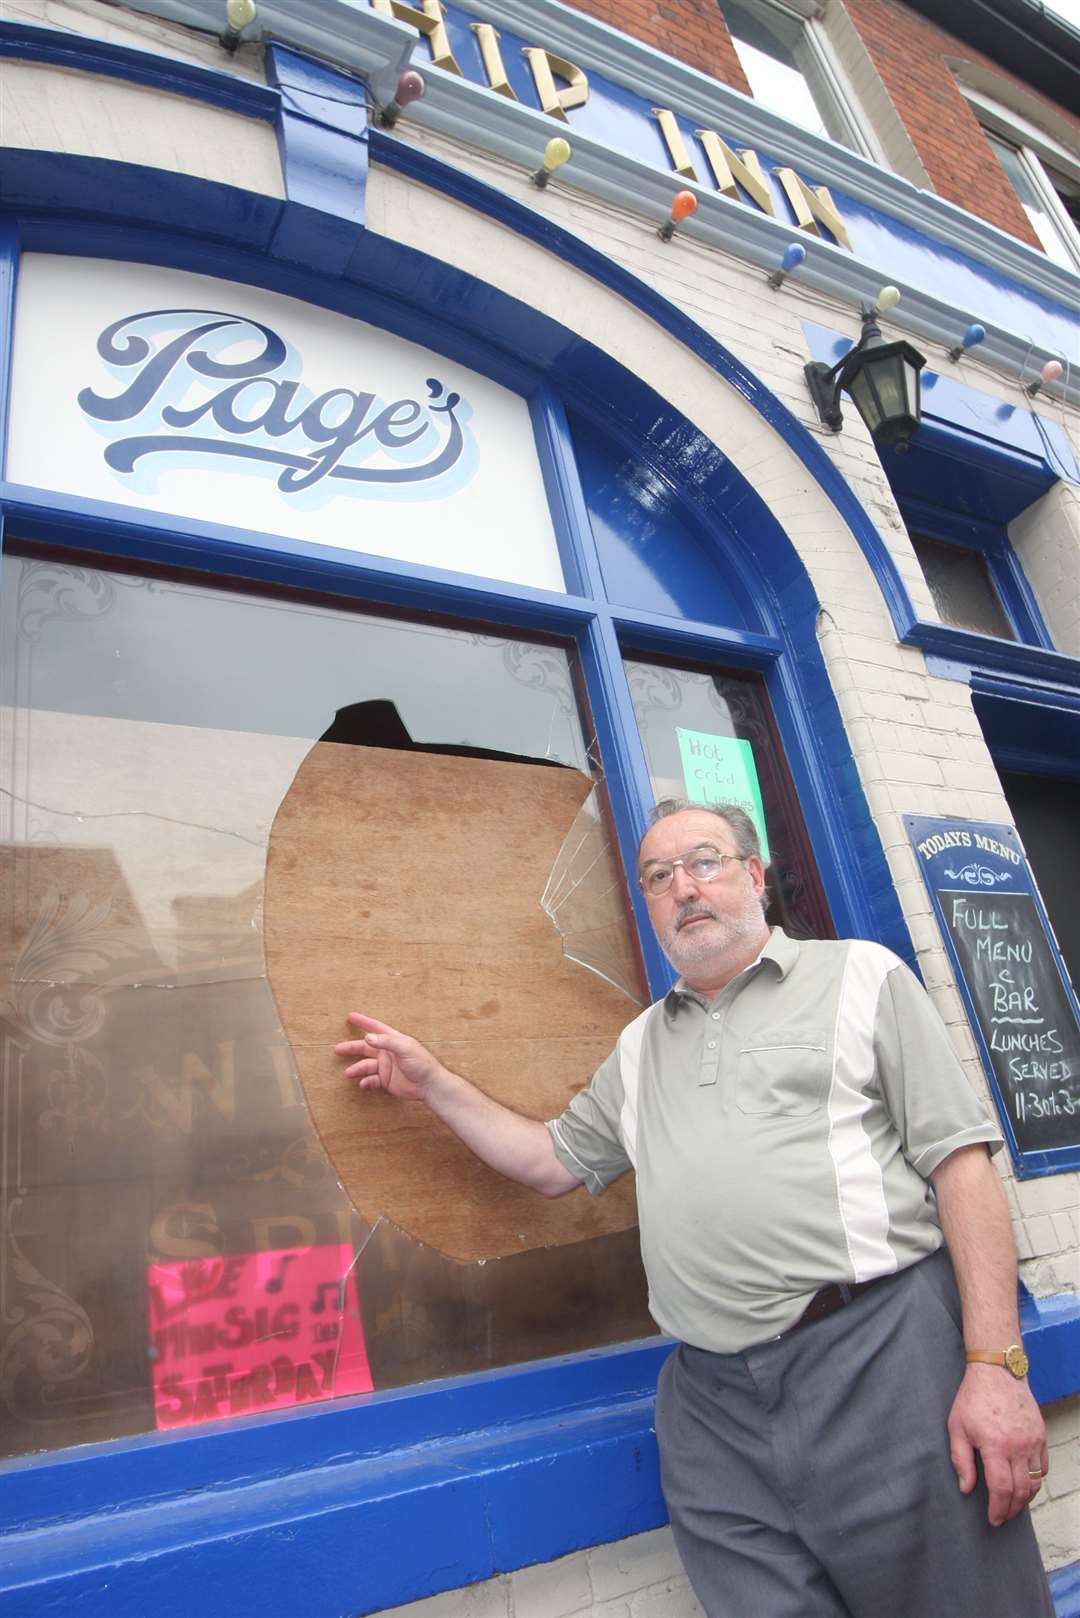 Popular landlord Michael Page was unhappy in 2008 when a pane of glass was broken outside his pub. Picture: John Westhrop